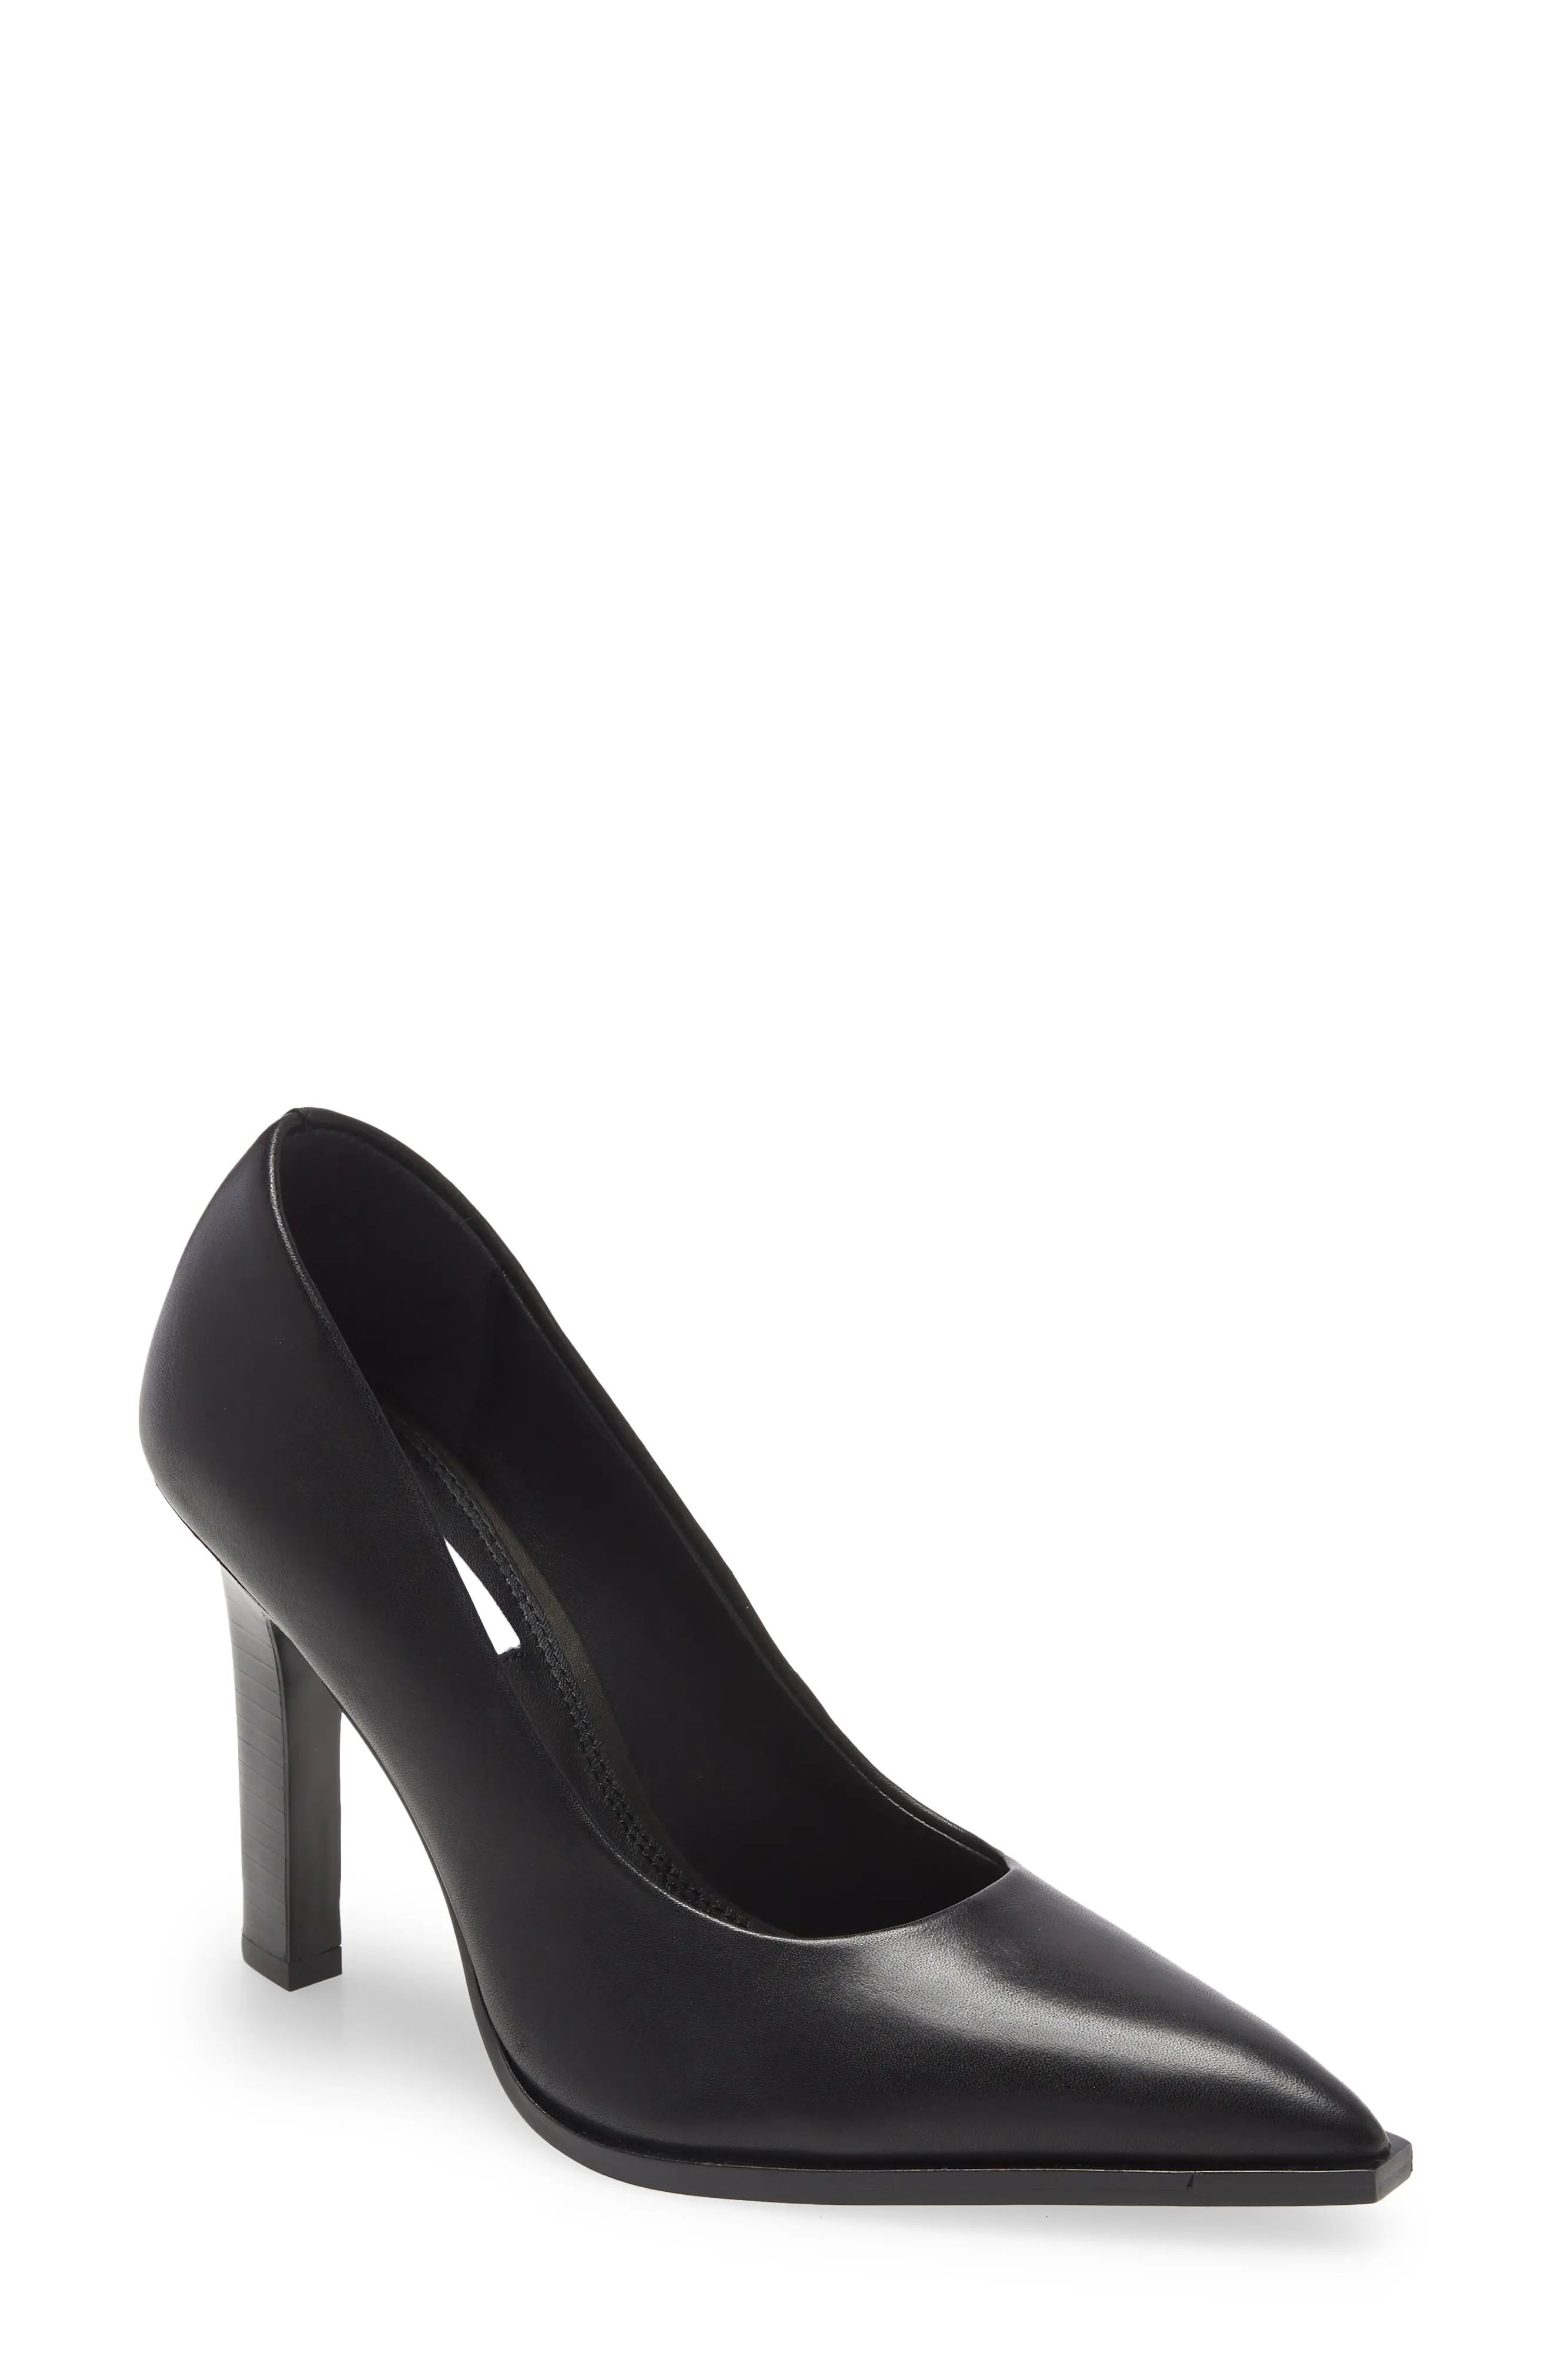 Reiss Ada Court Pointy Toe Stiletto Pump, Size 10.5Us in Black at Nordstrom | Nordstrom